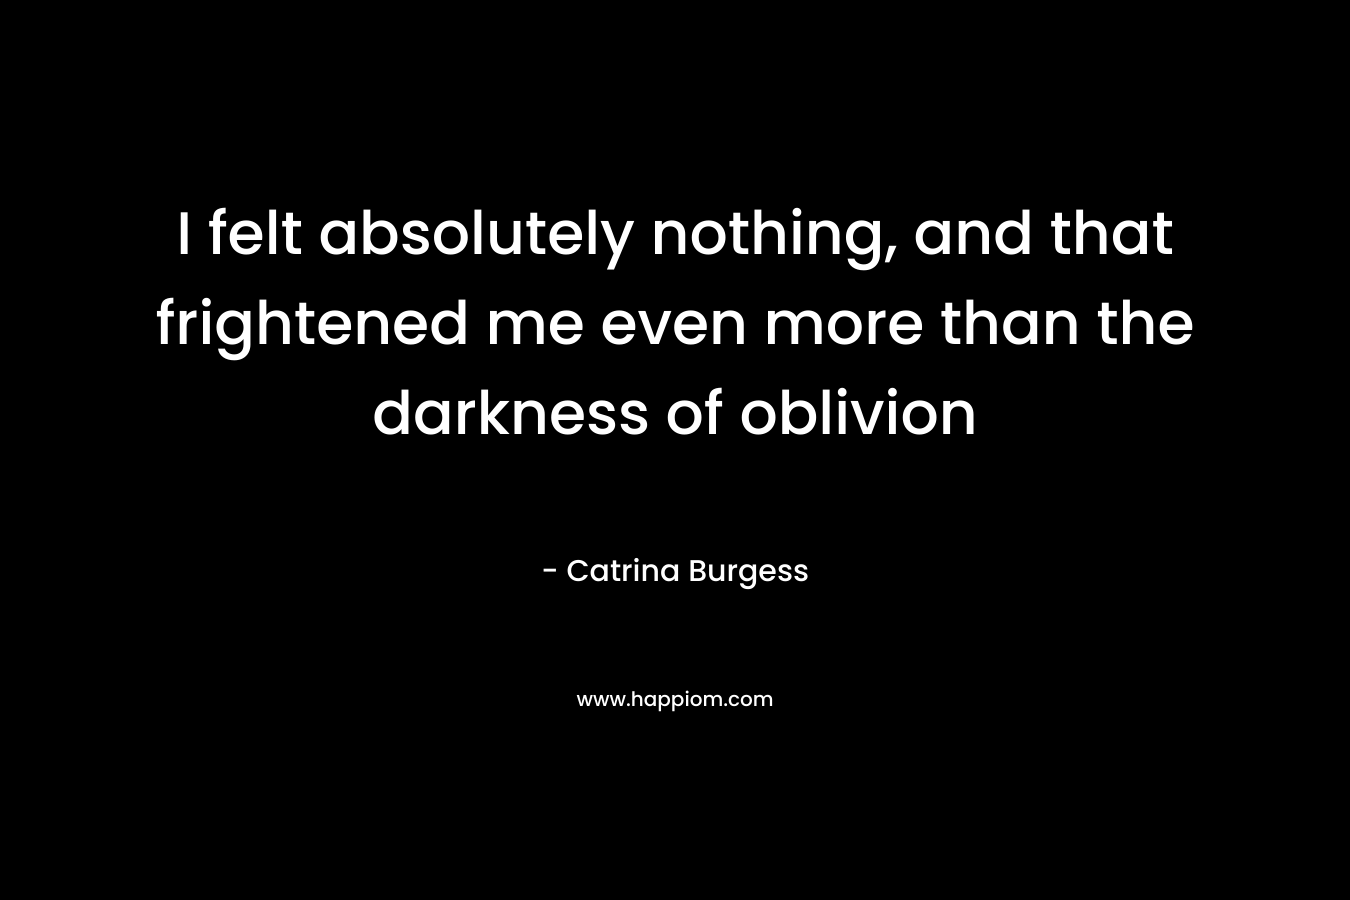 I felt absolutely nothing, and that frightened me even more than the darkness of oblivion